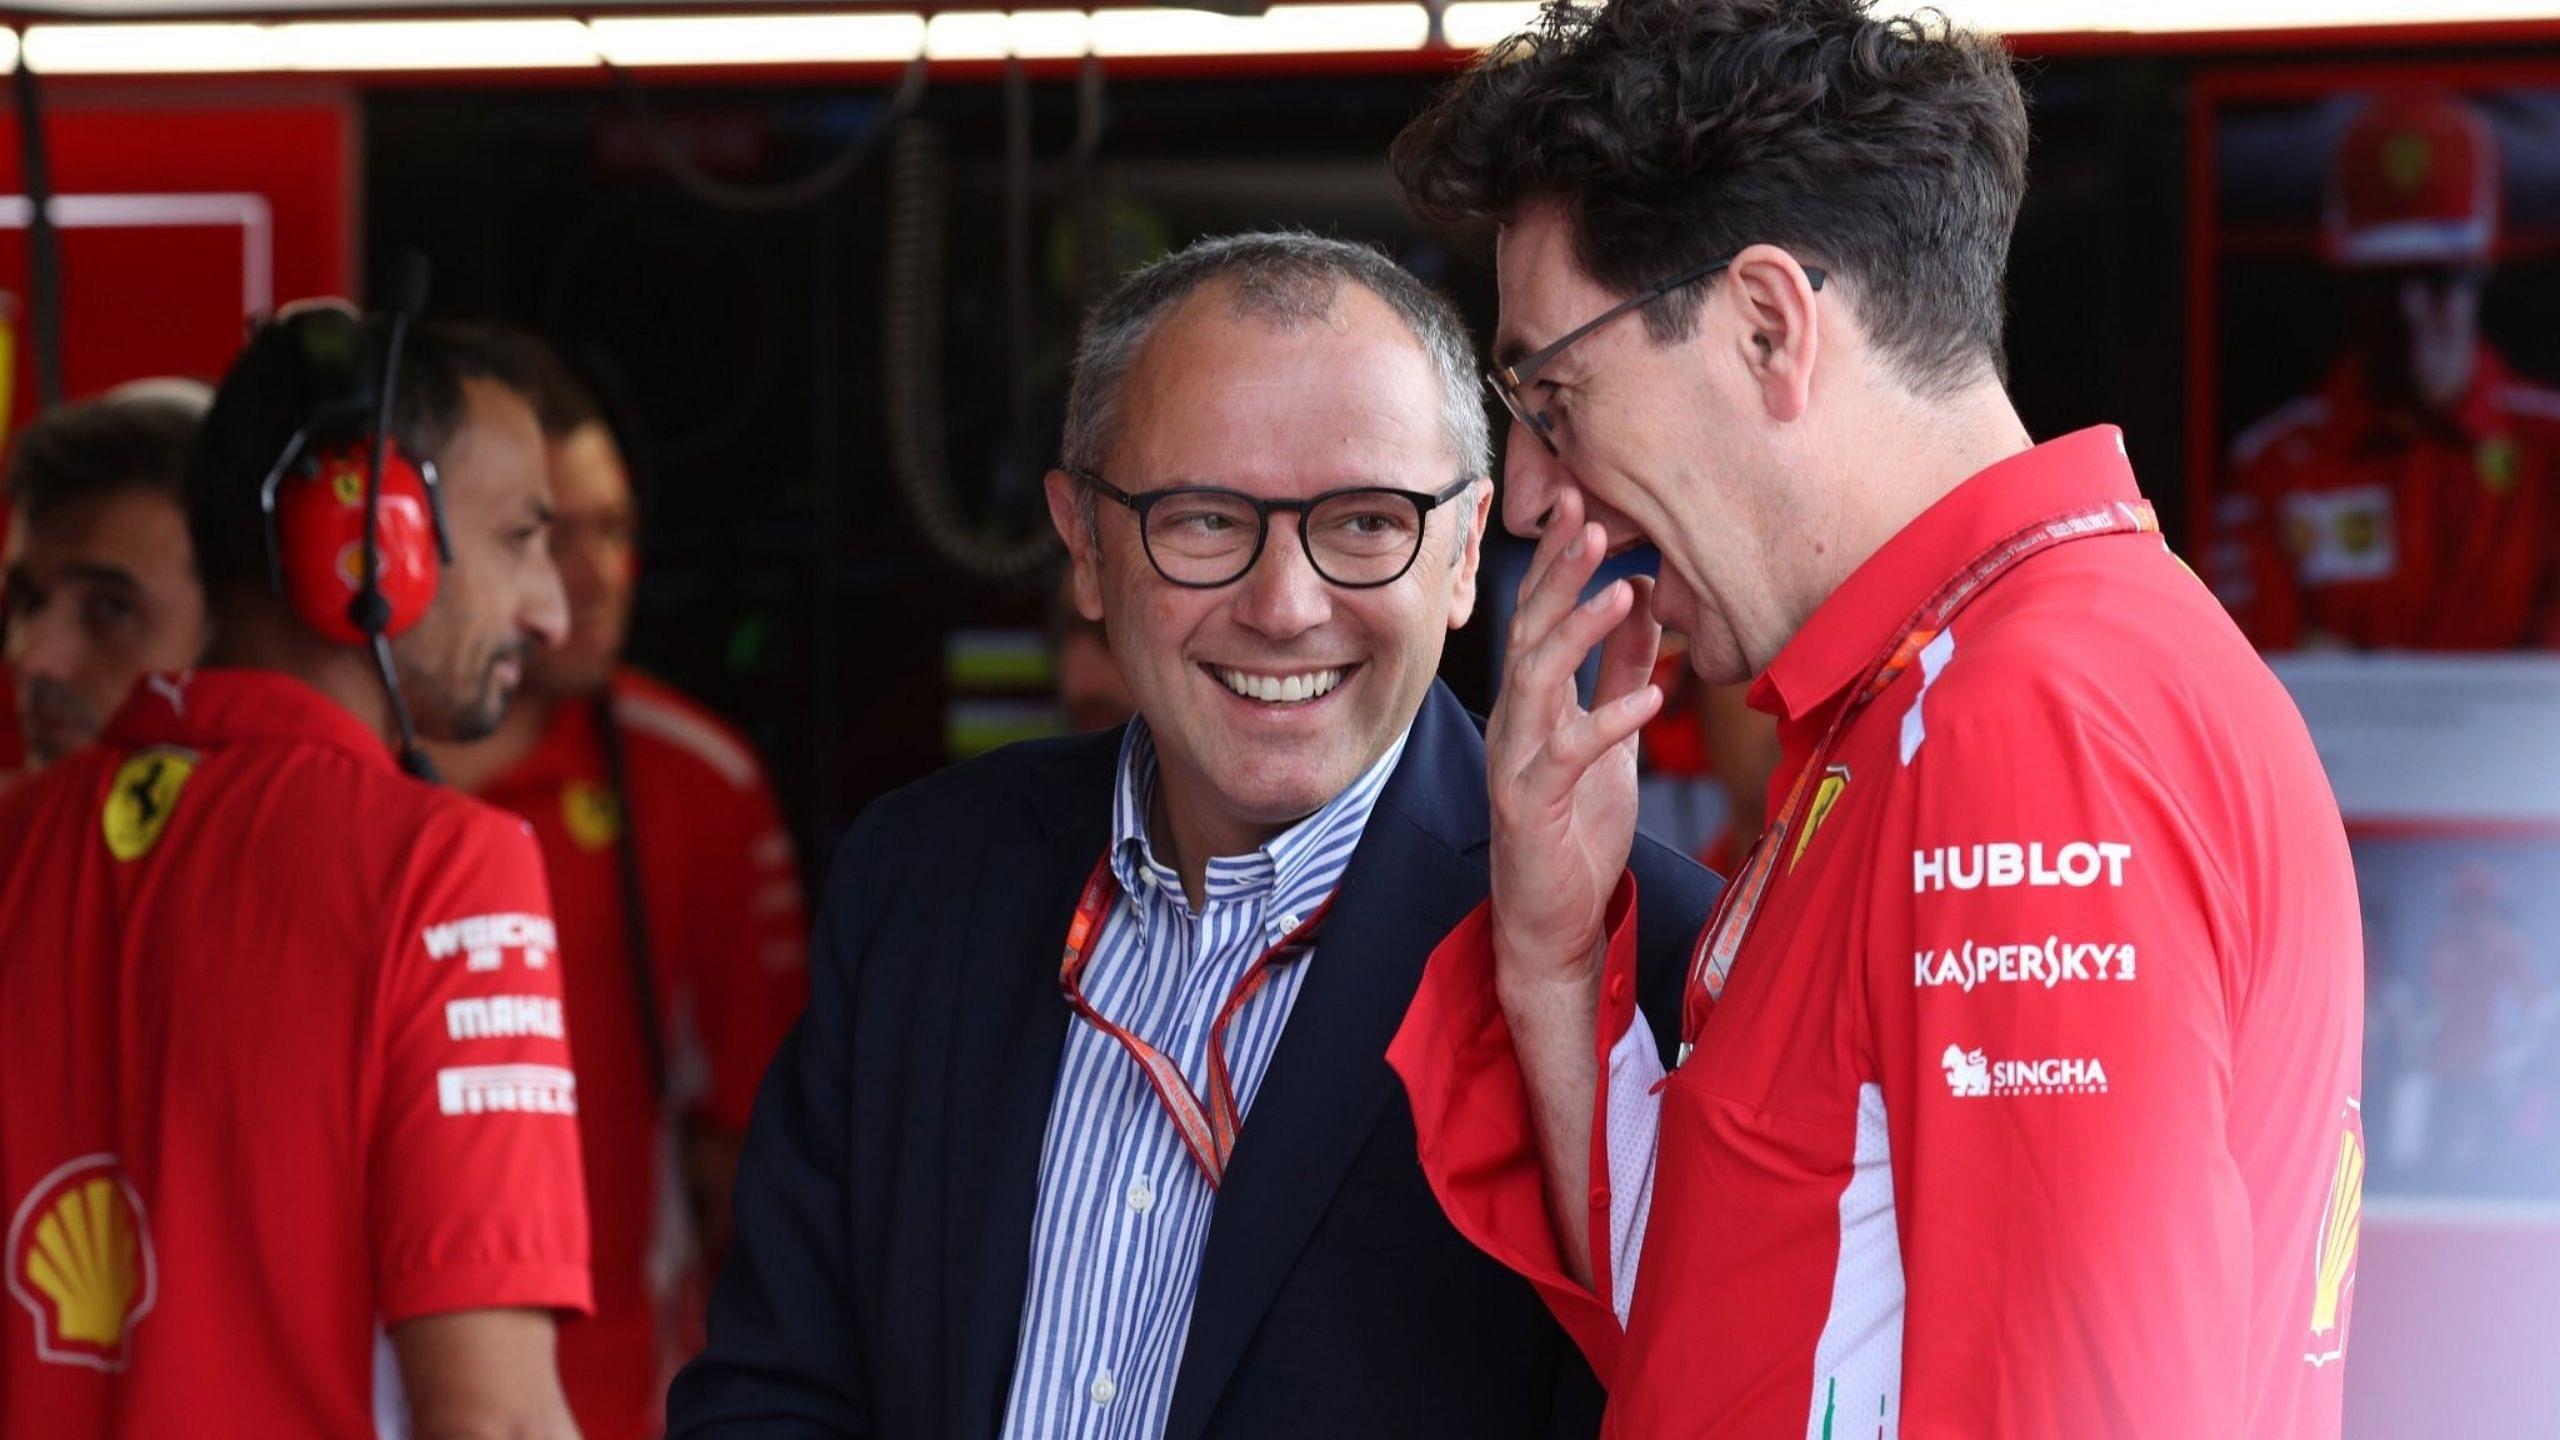 “The Ferrari adventure affects the entire sports audience" - F1 CEO Stefano Domenicali backs former team to return to the pinnacle